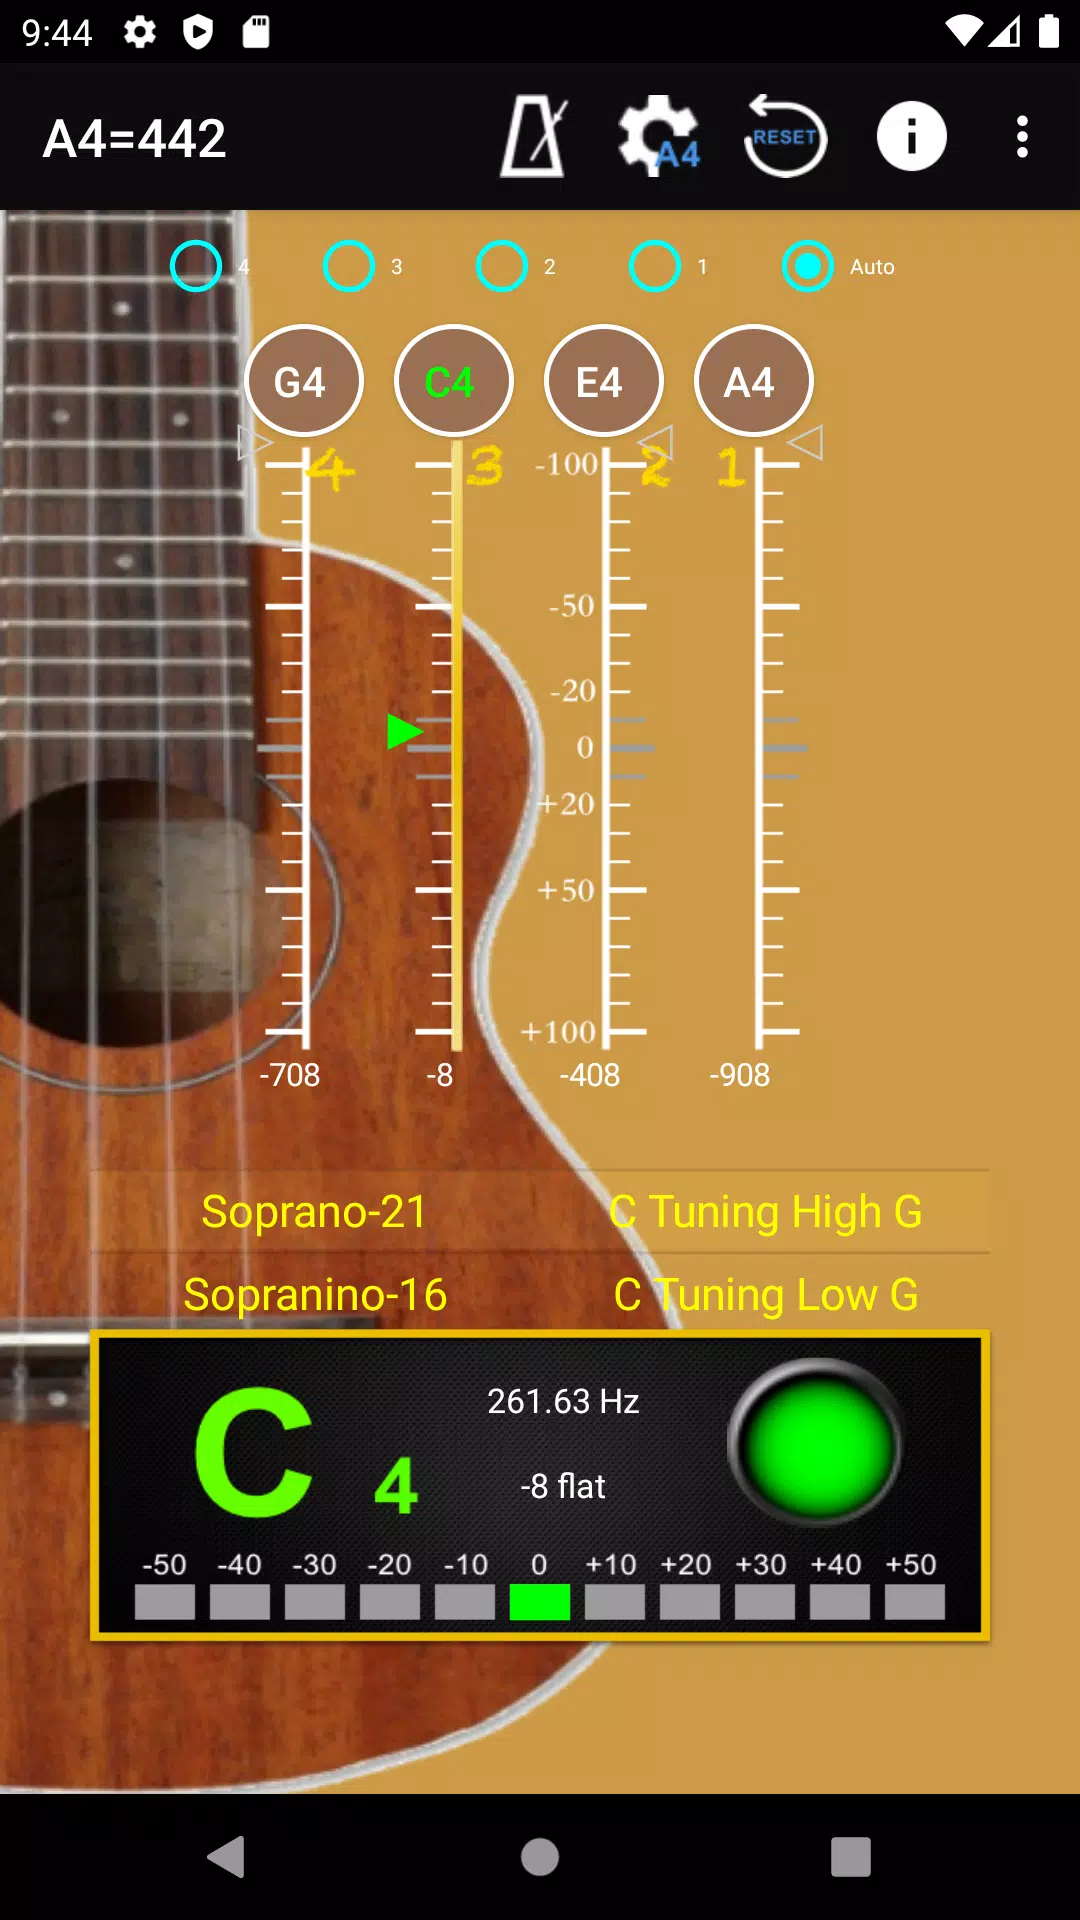 Ukulele Tuner APK for Android Download